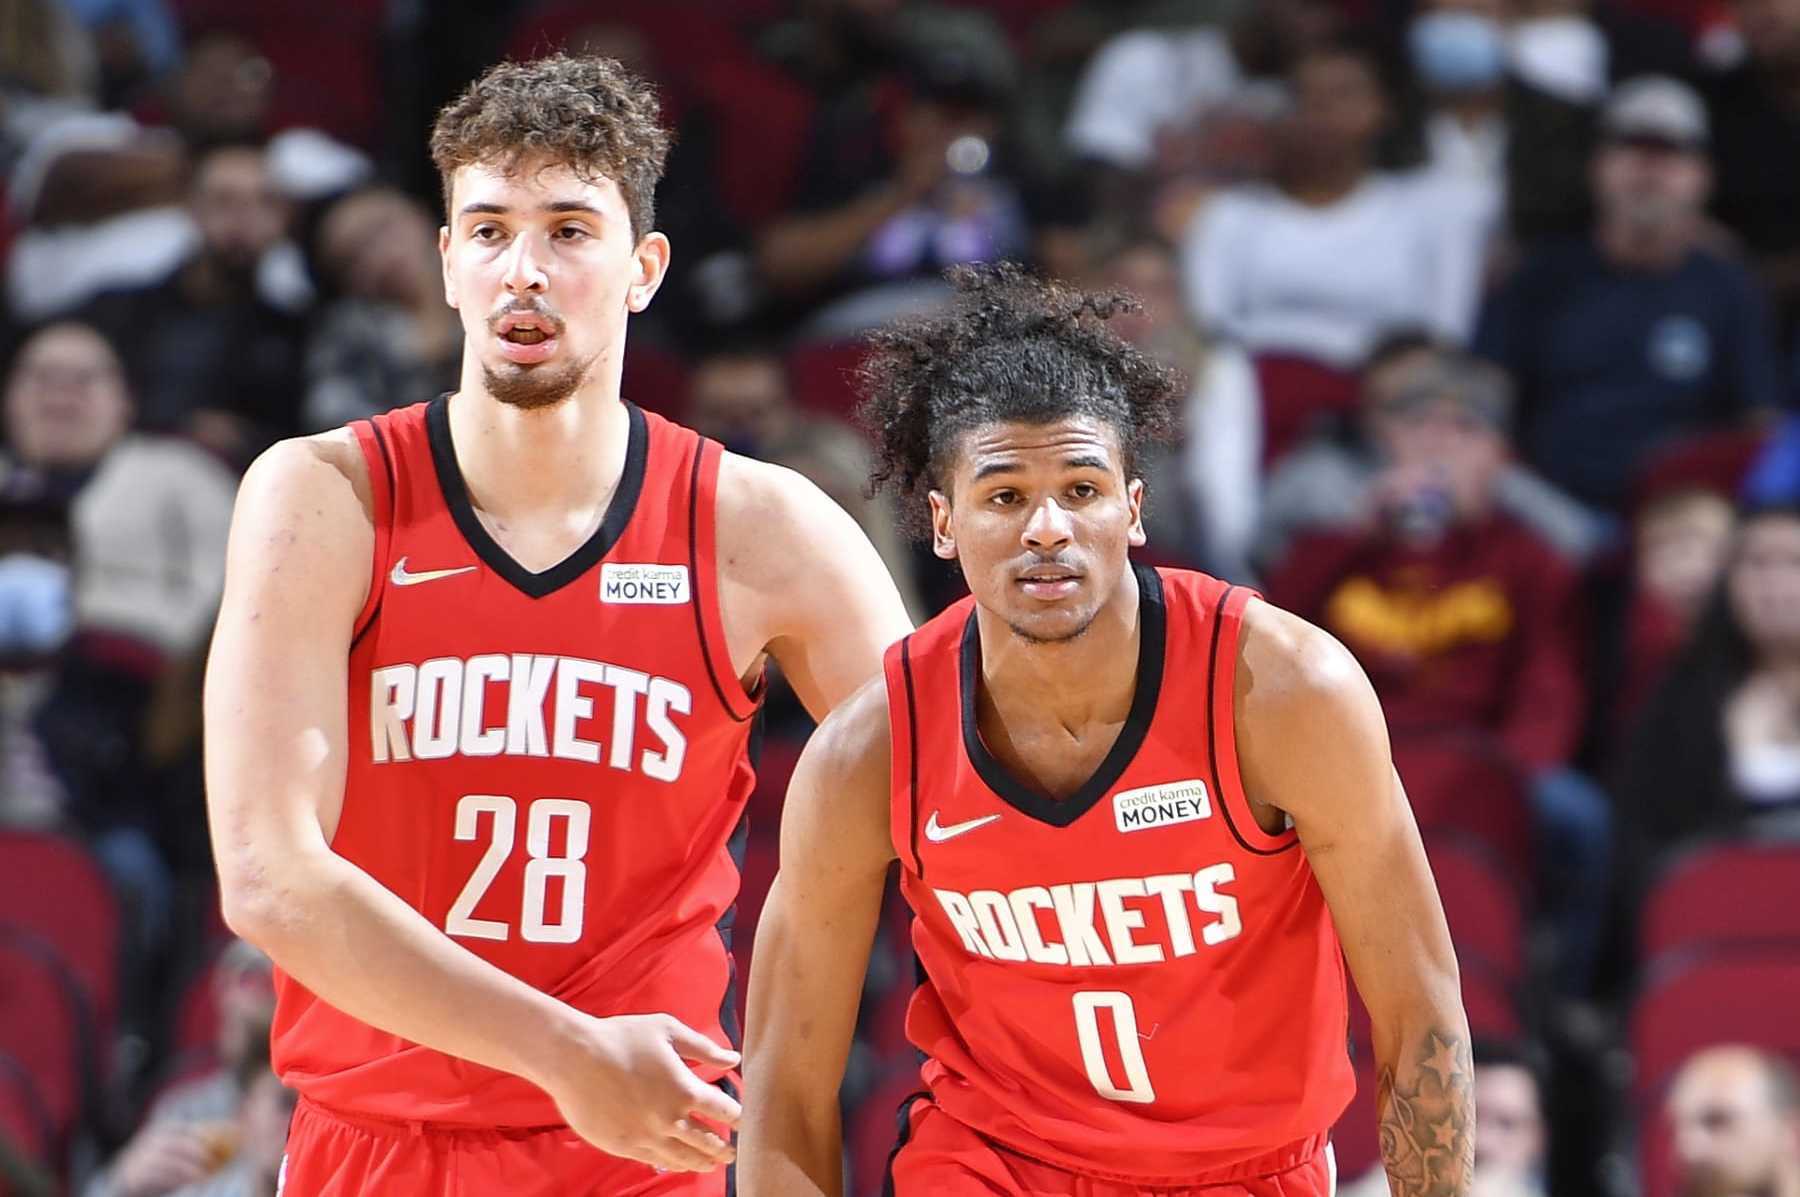 Rockets: Why it's time to stop talking about the infamous Jalen Green videos